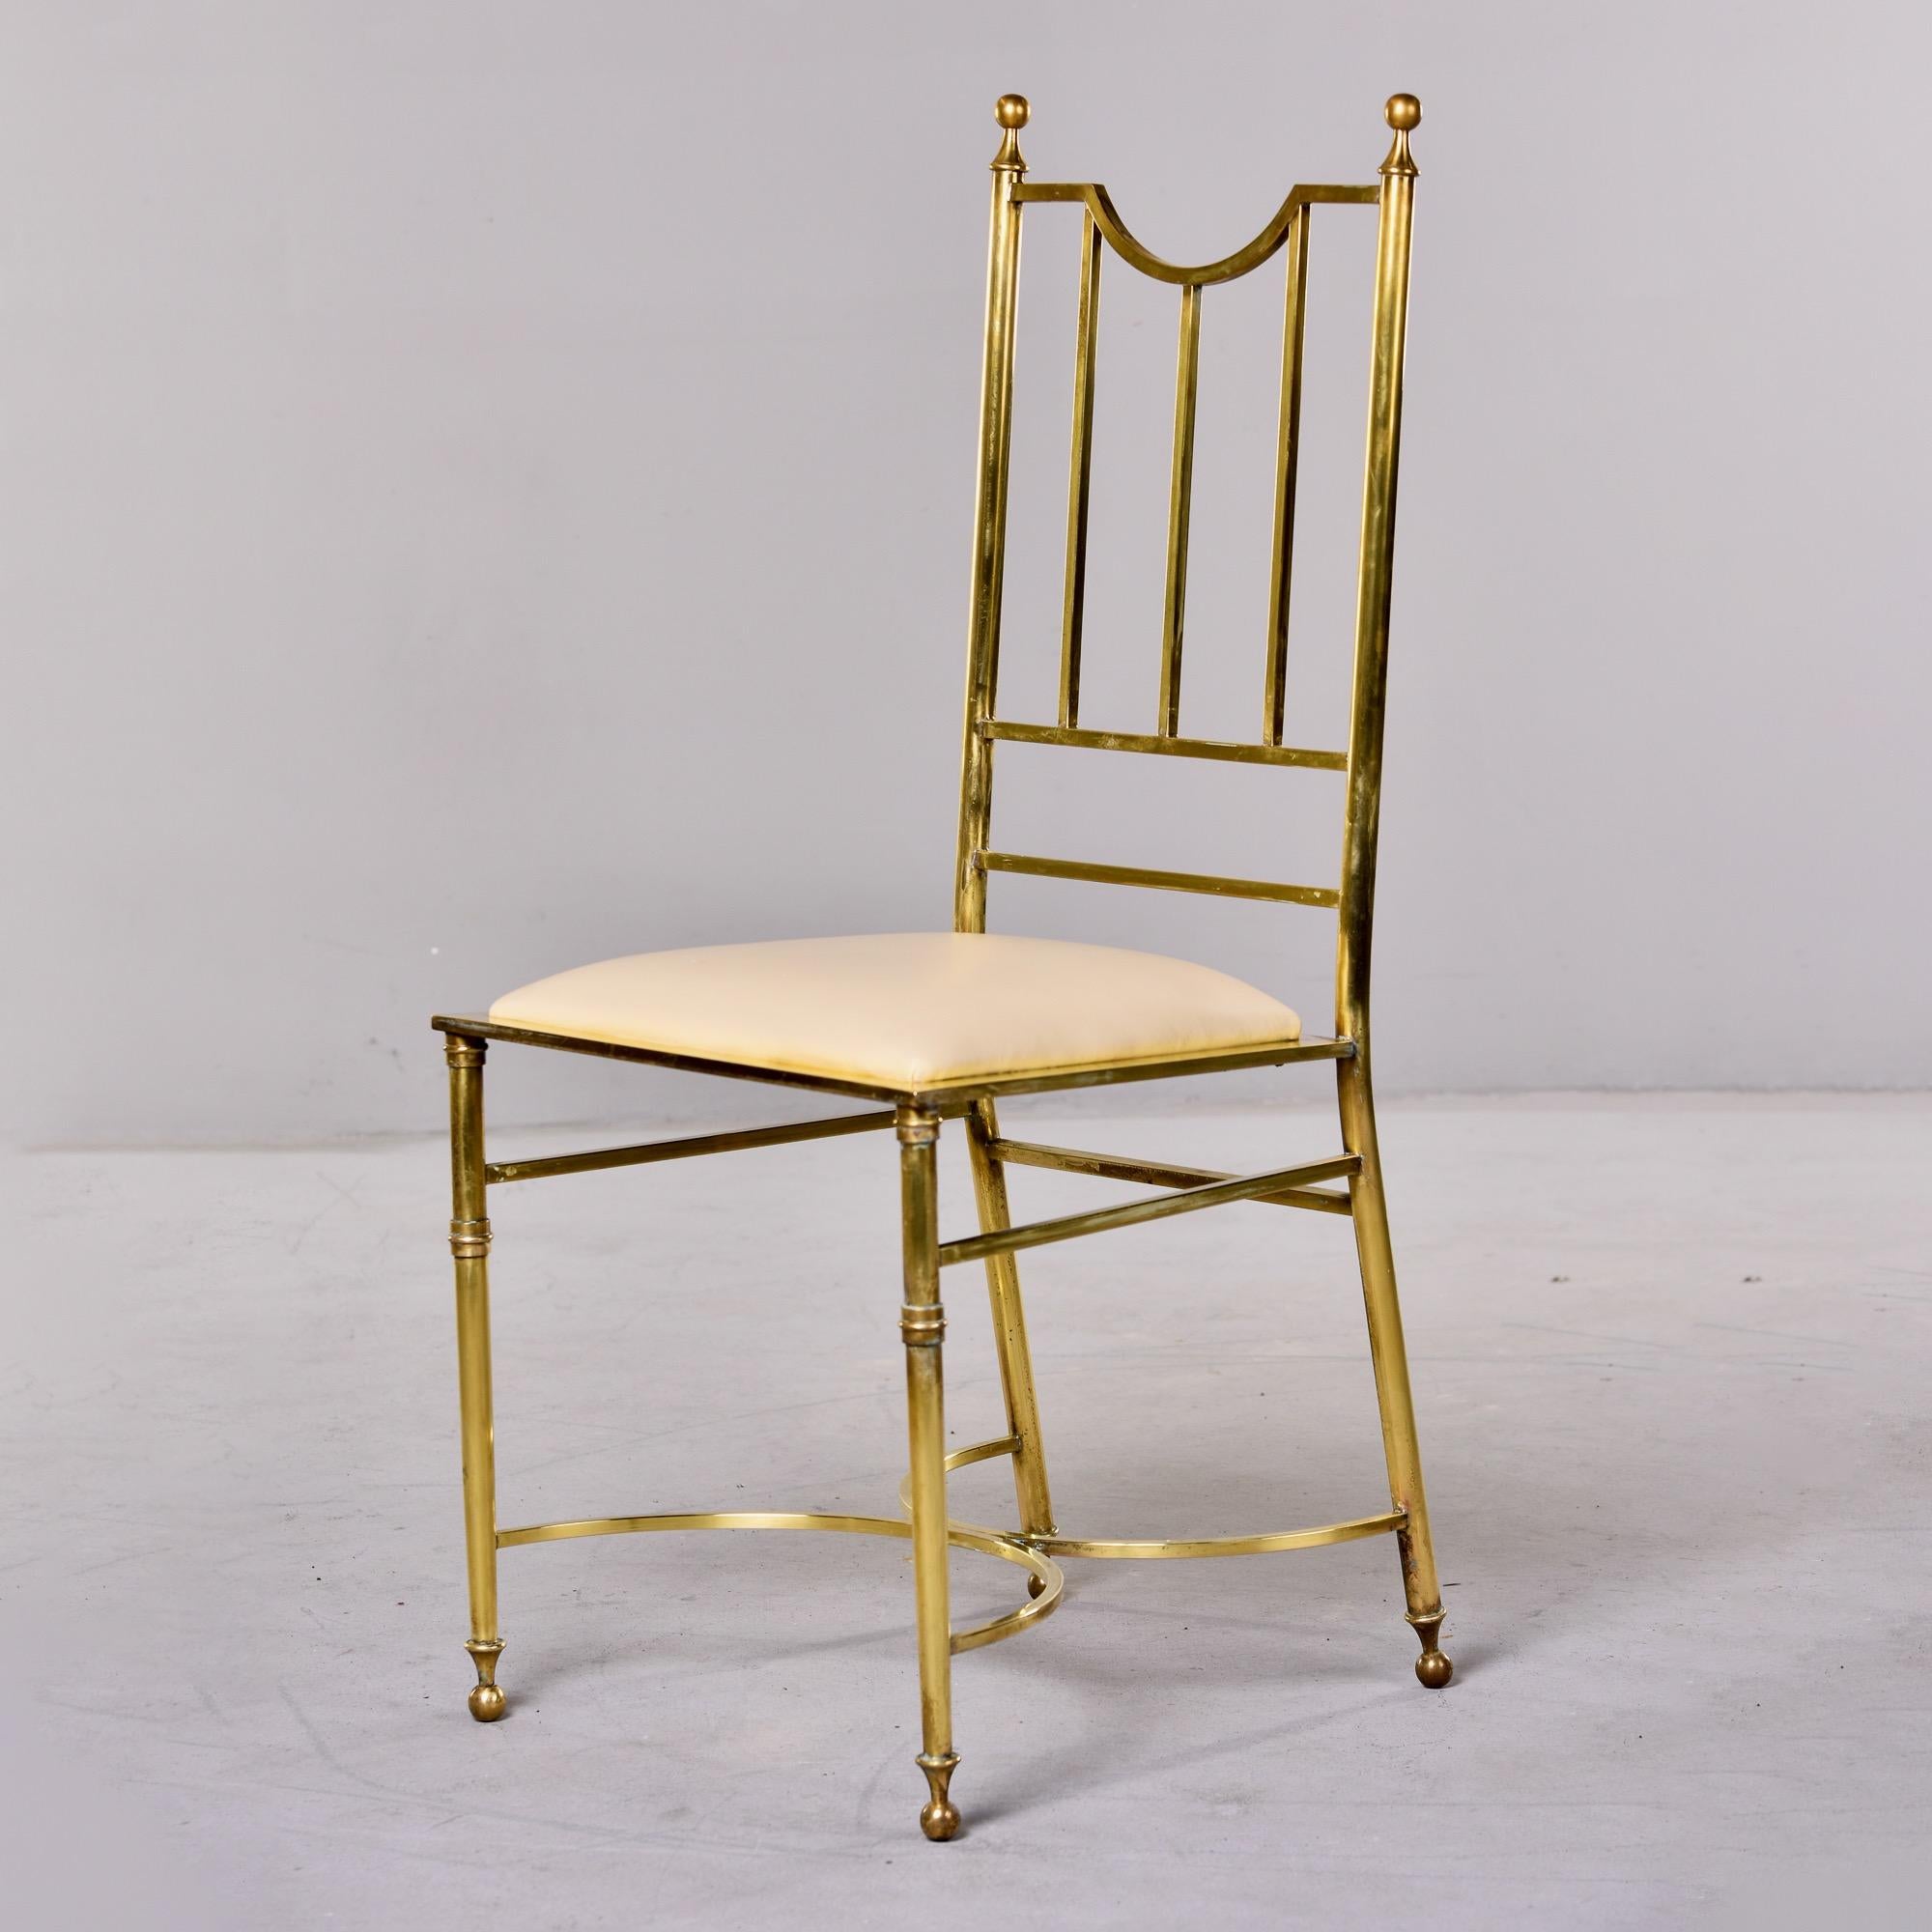 1930s Brass Frame Chair with Leather Seat 4